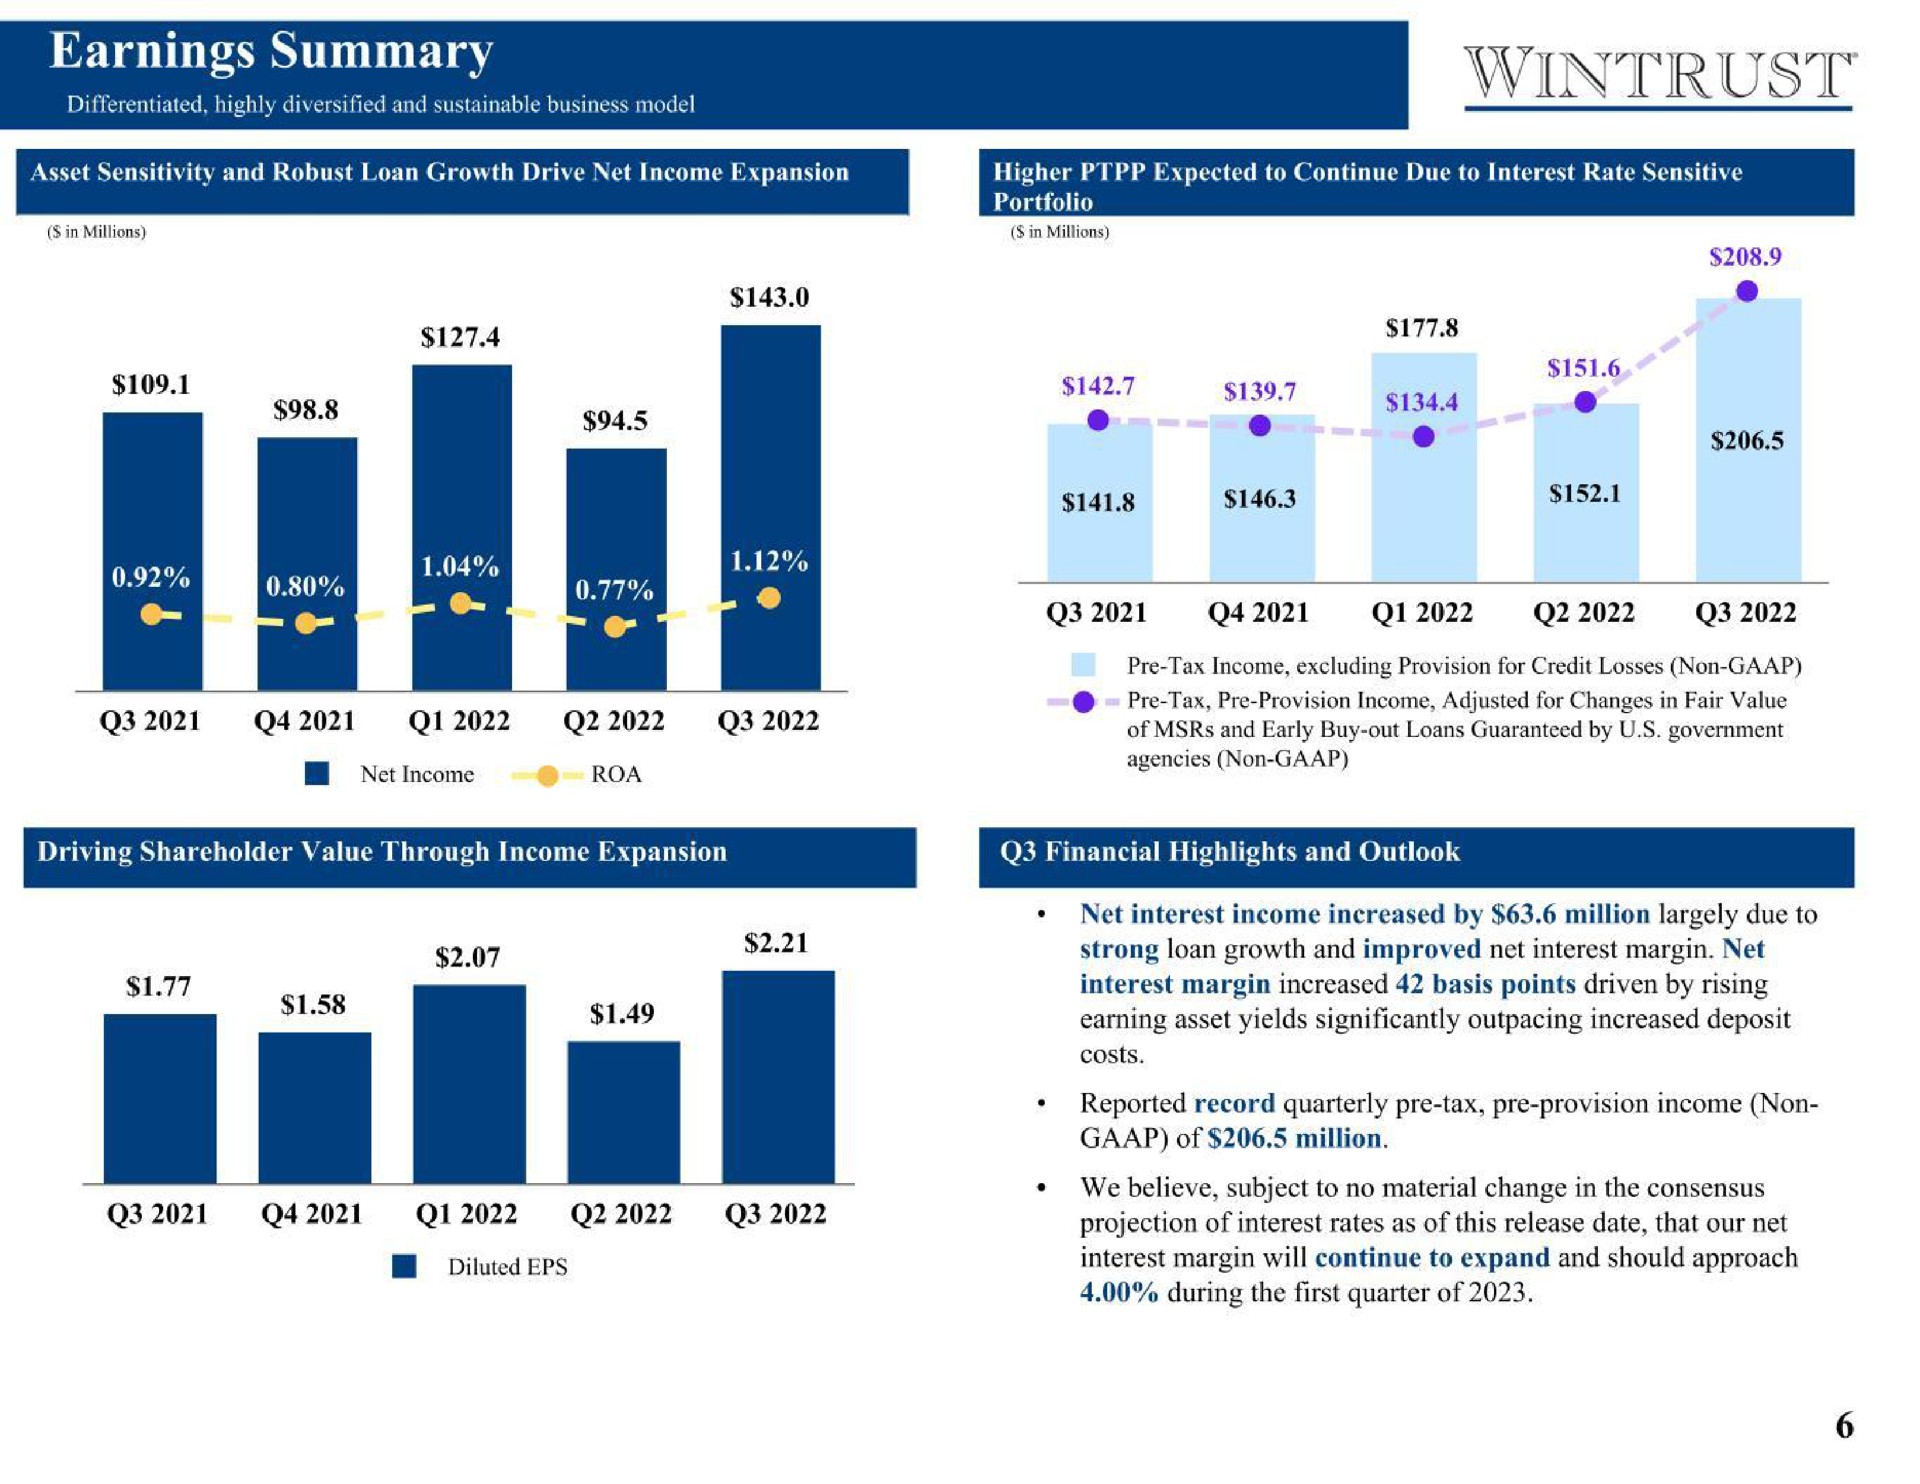 earnings summary a diluted interest margin will continue to expand and should approach | Wintrust Financial